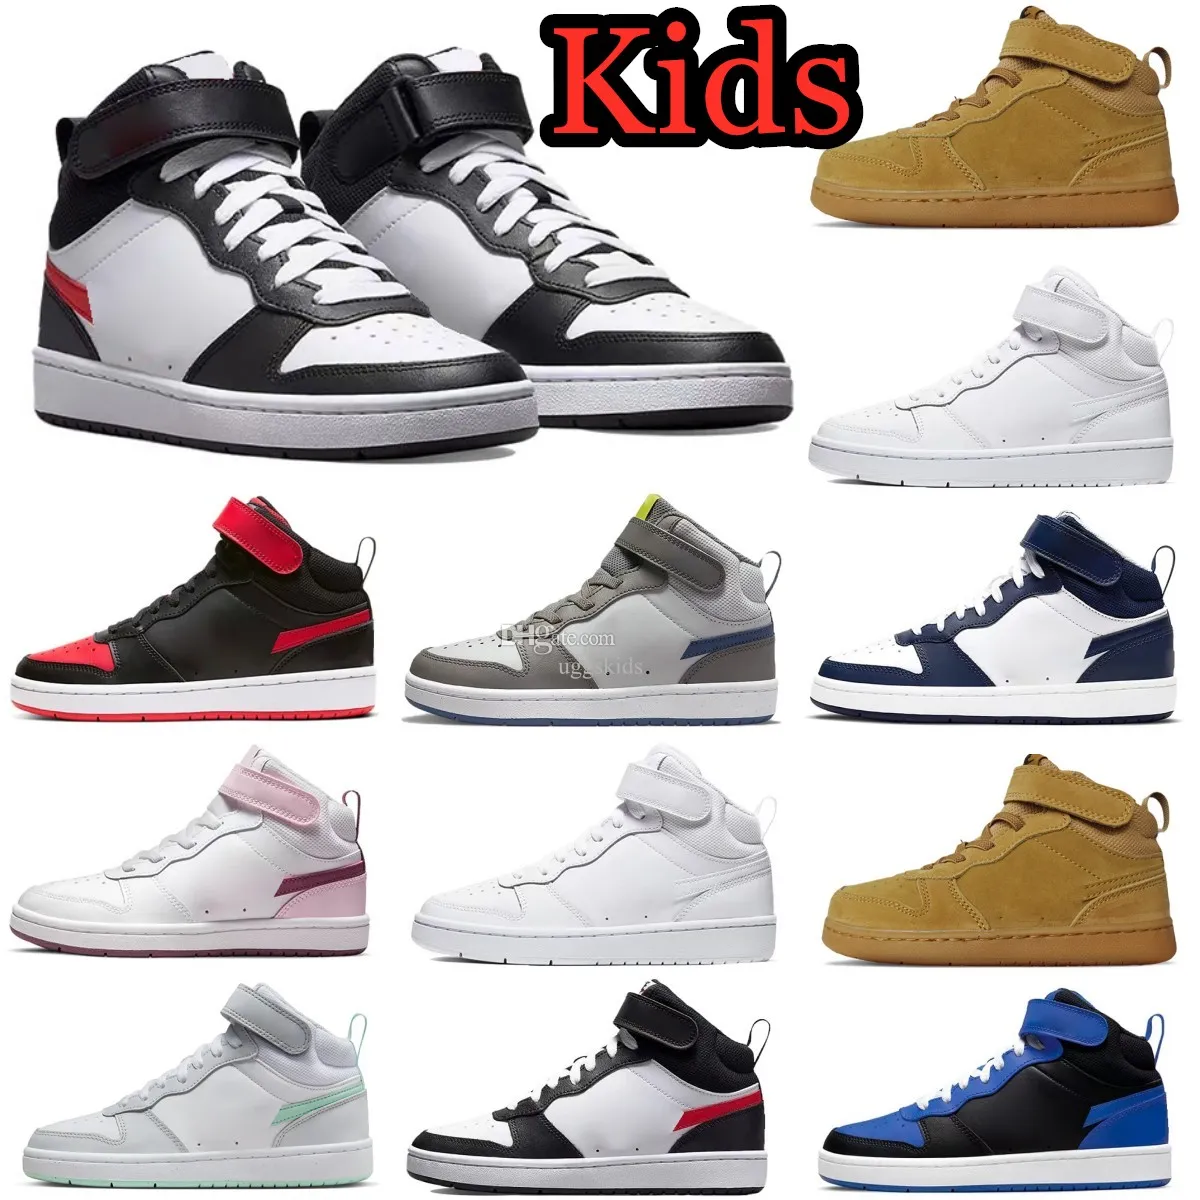 1S Kids Shoes 1 Low Basketball Designer Toddler Sneakers Boys Girls Baby Baby Trainers Flax Triple White Red Black Youth Shoe Kids US 6C 4y 5 y